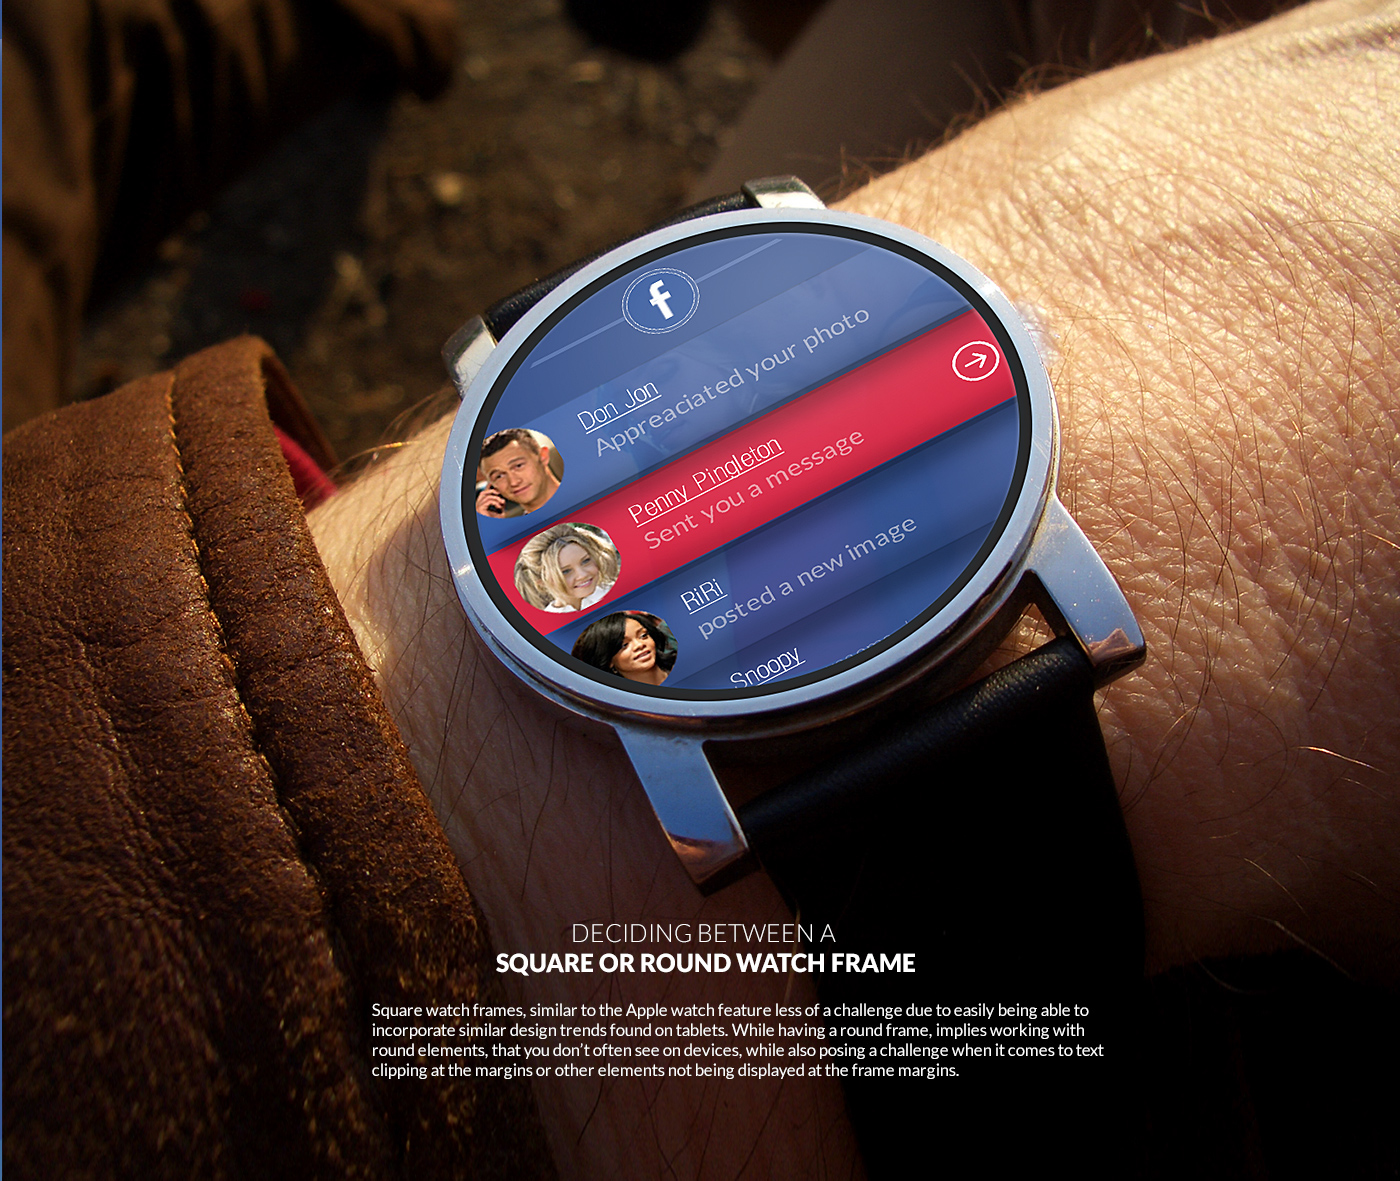 facebook app Smart watch Wearable device application ux UI interaction design research advanced wireframes prototype